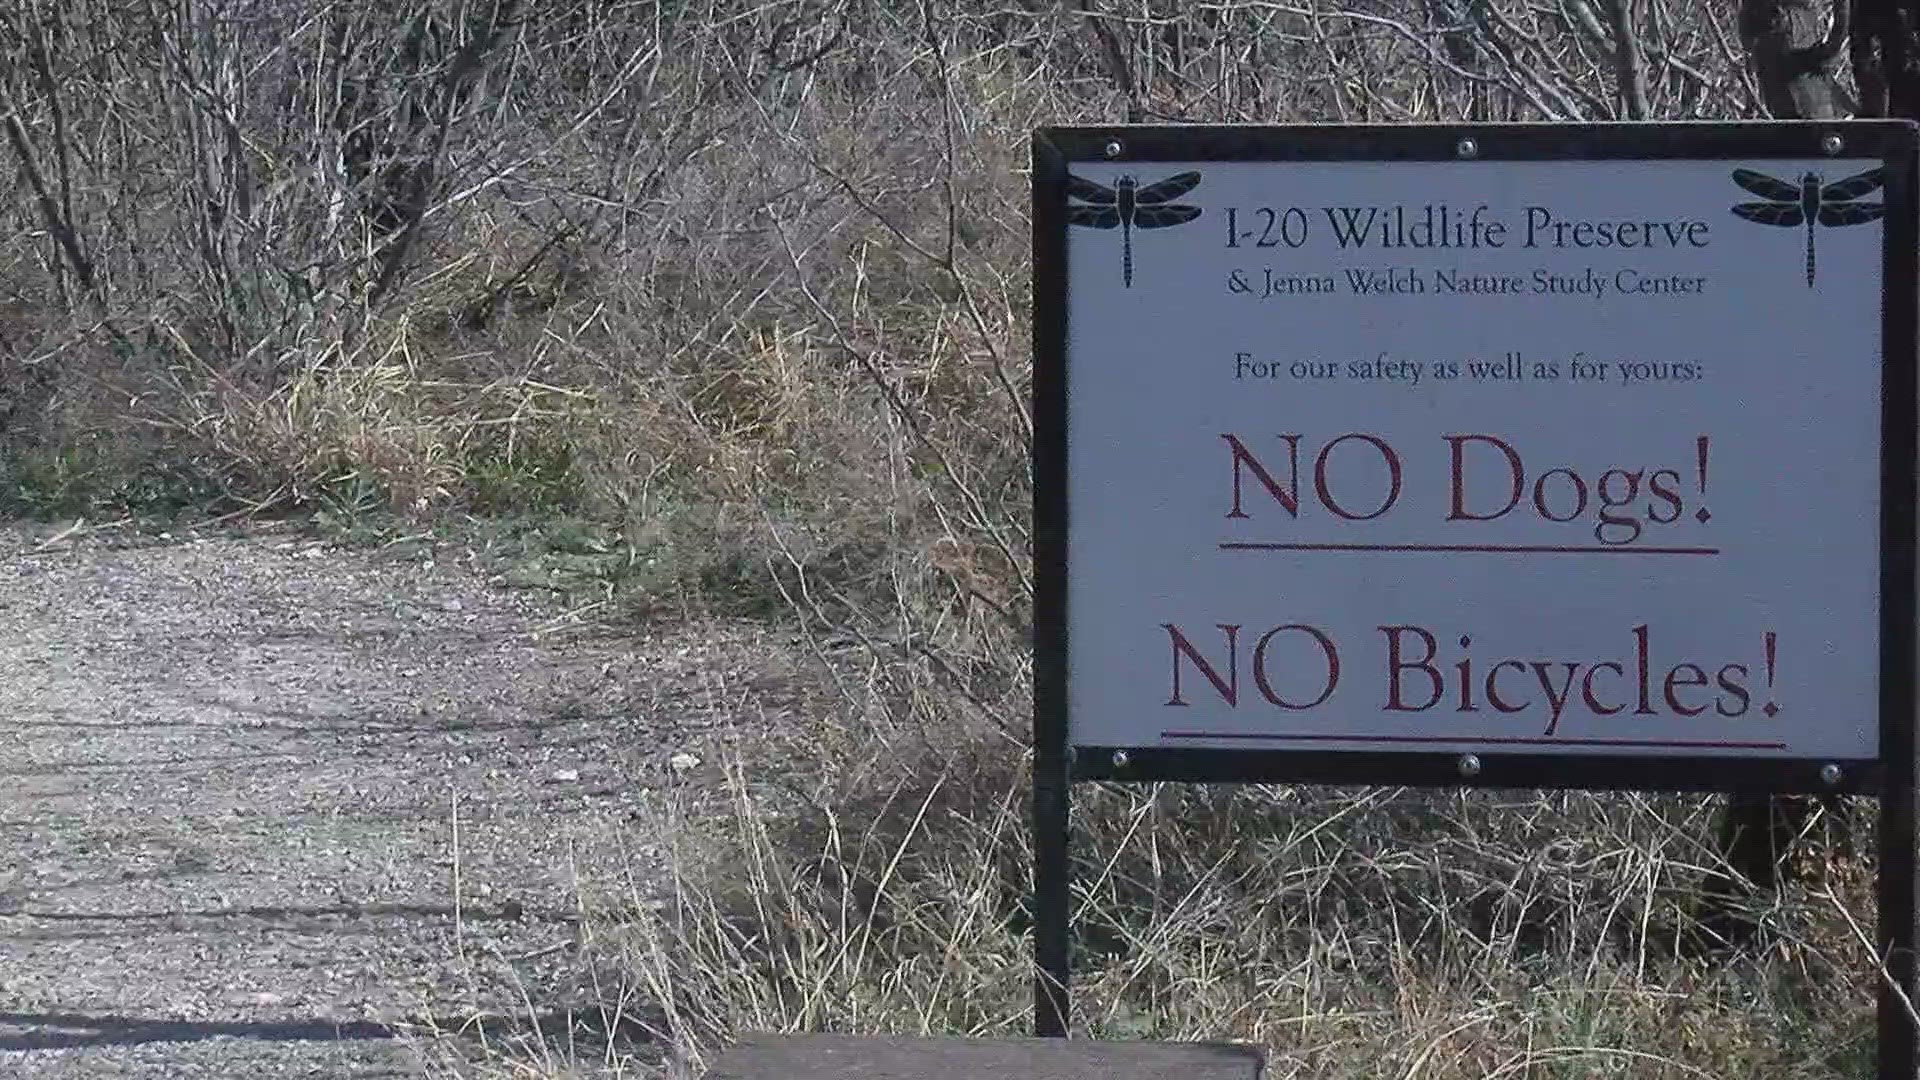 At the Midland City Council meeting Tuesday, a lift station being added was talked about to replace the current system at the I-20 Wildlife Preserve.